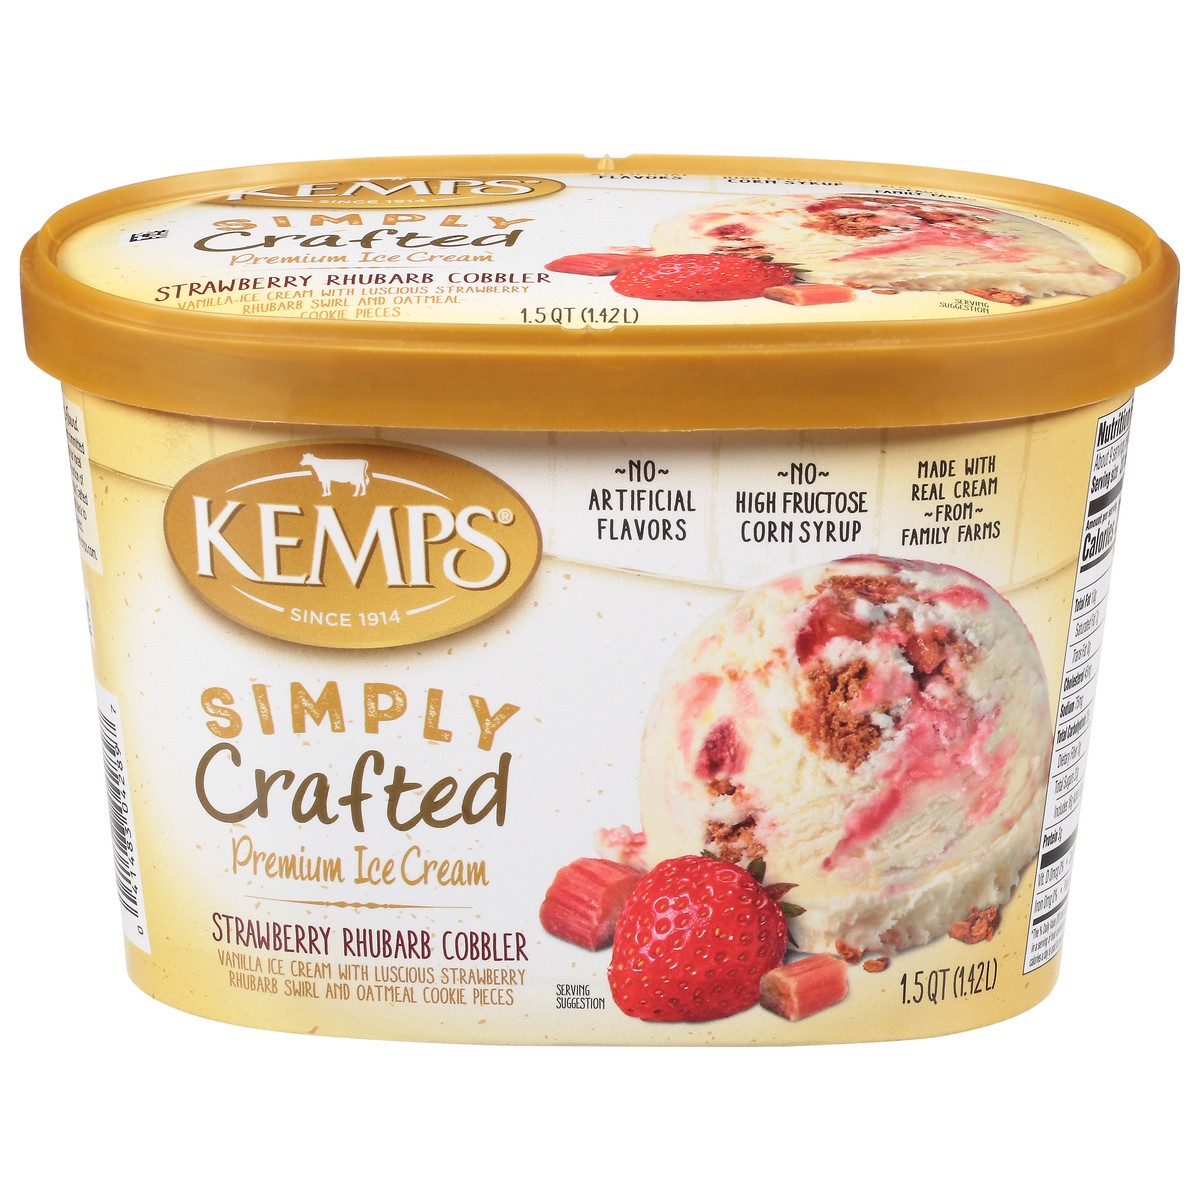 slide 1 of 14, Kemps Simply Crafted Premium Strawberry Rhubarb Cobbler Ice Cream 1.5 qt, 48 oz